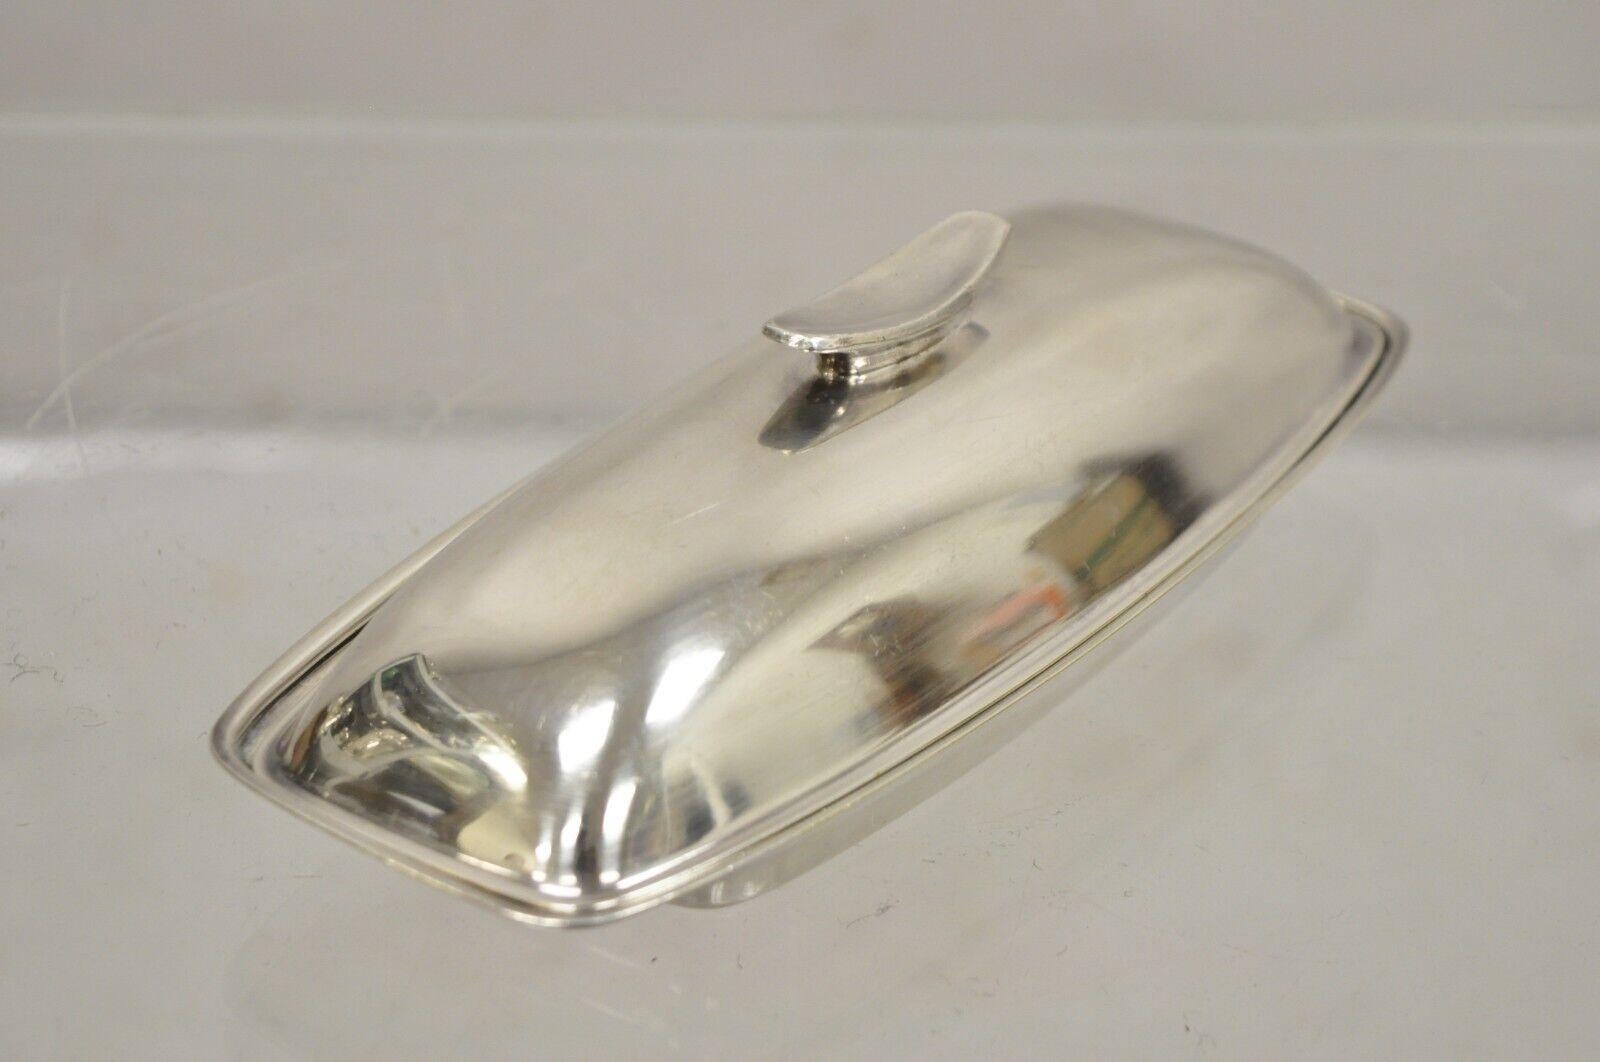 Vintage Gorham YC 775 Silver Plated Modern Butter Dish w/ Glass Liner. Circa Mid 20th Century. Measurements:  2.5